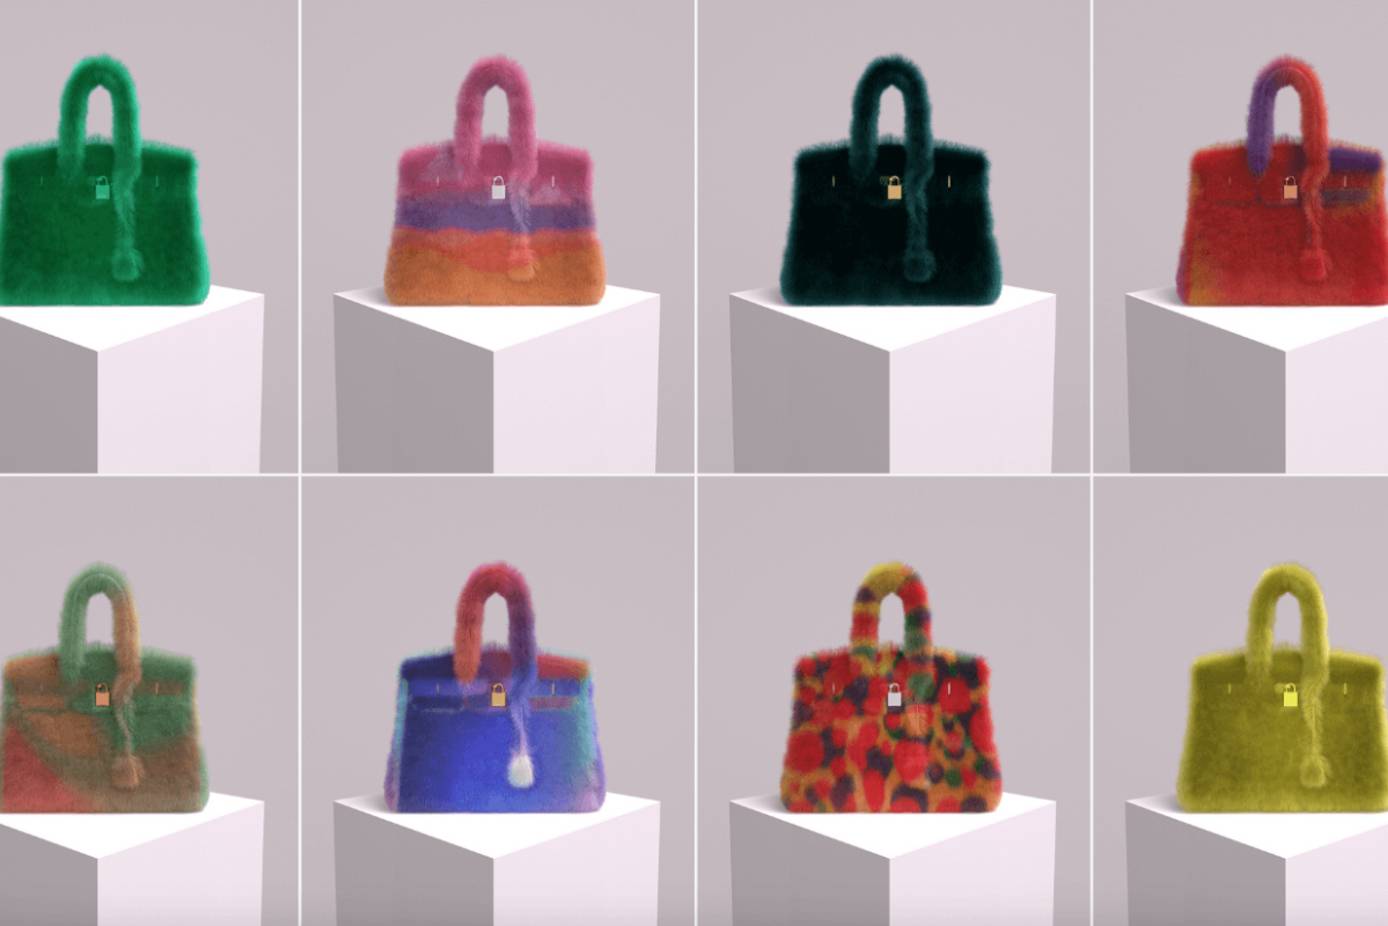 Hermès Goes Virtual With Launch Of Birkin Bags As NFTs